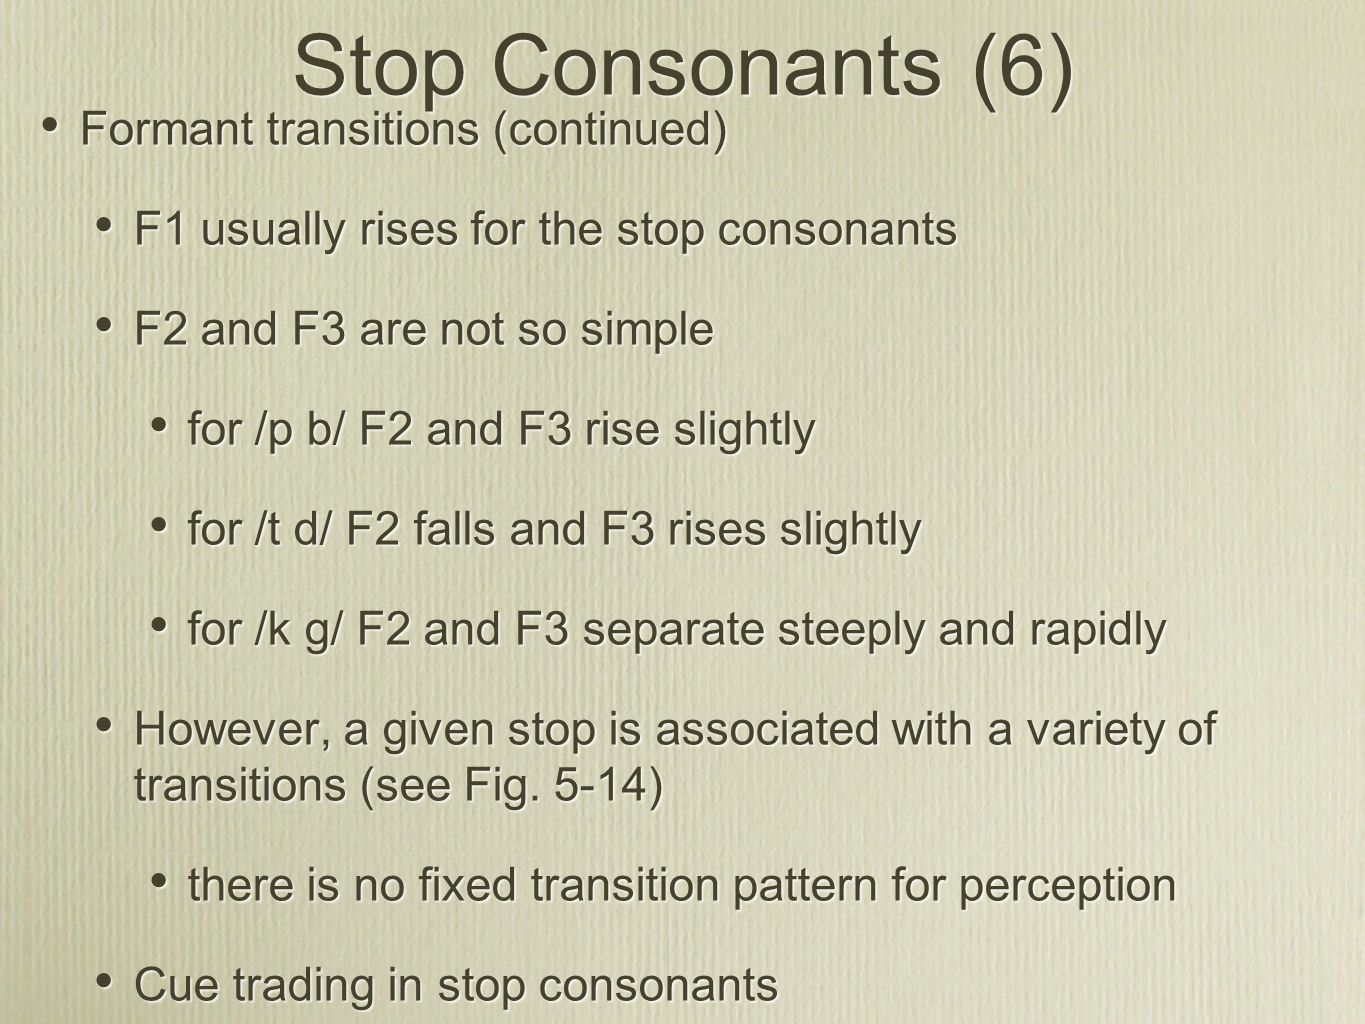 Stop Consonants (6) Formant transitions (continued)